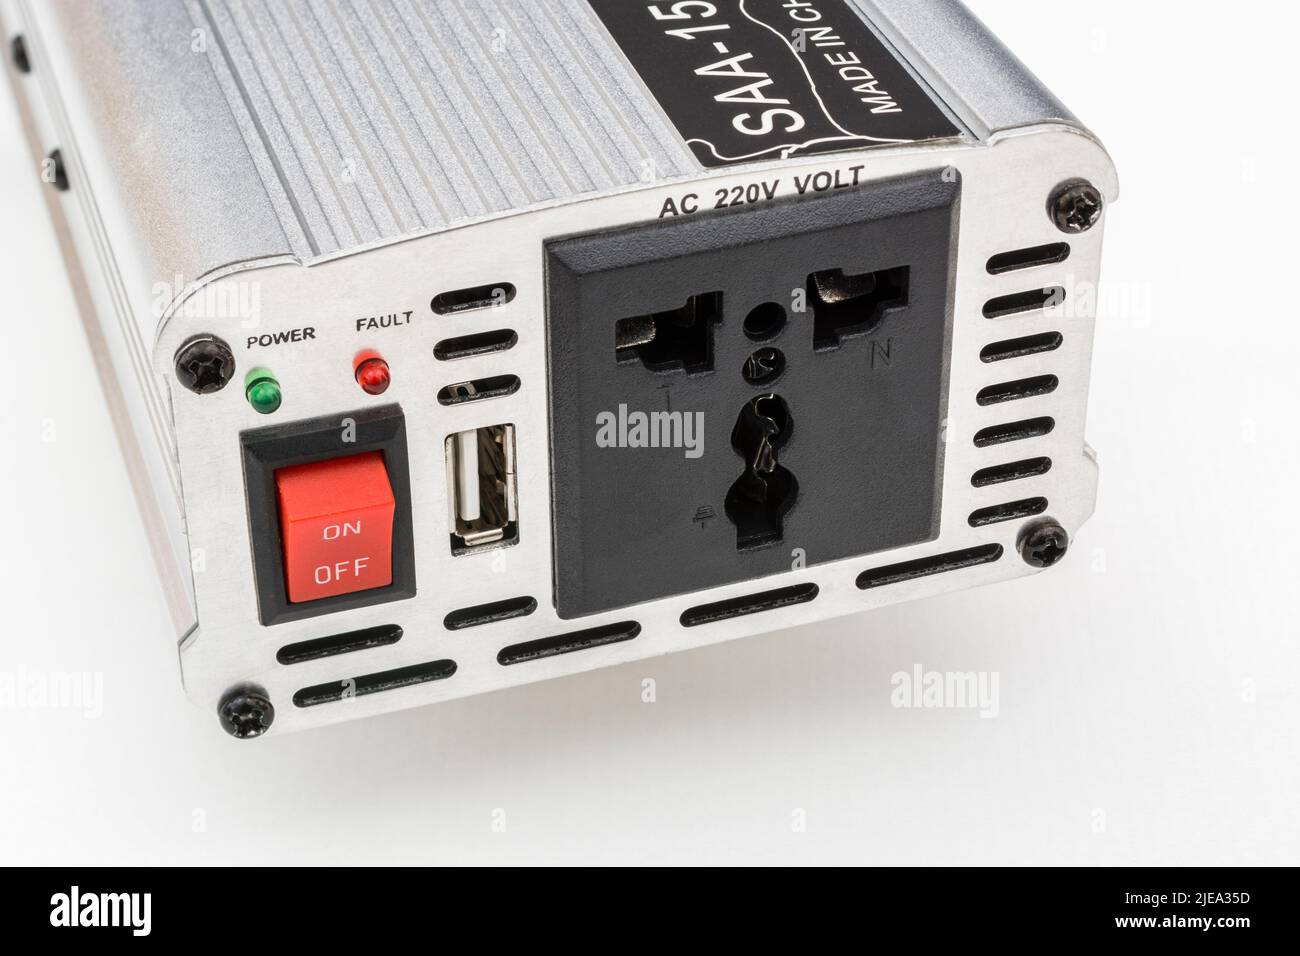 1500w / Watt DC to AC inverter unit made in China. Red On-Off switch and 3-pin AC power plug socket visible, along with USB charging point socket. Stock Photo